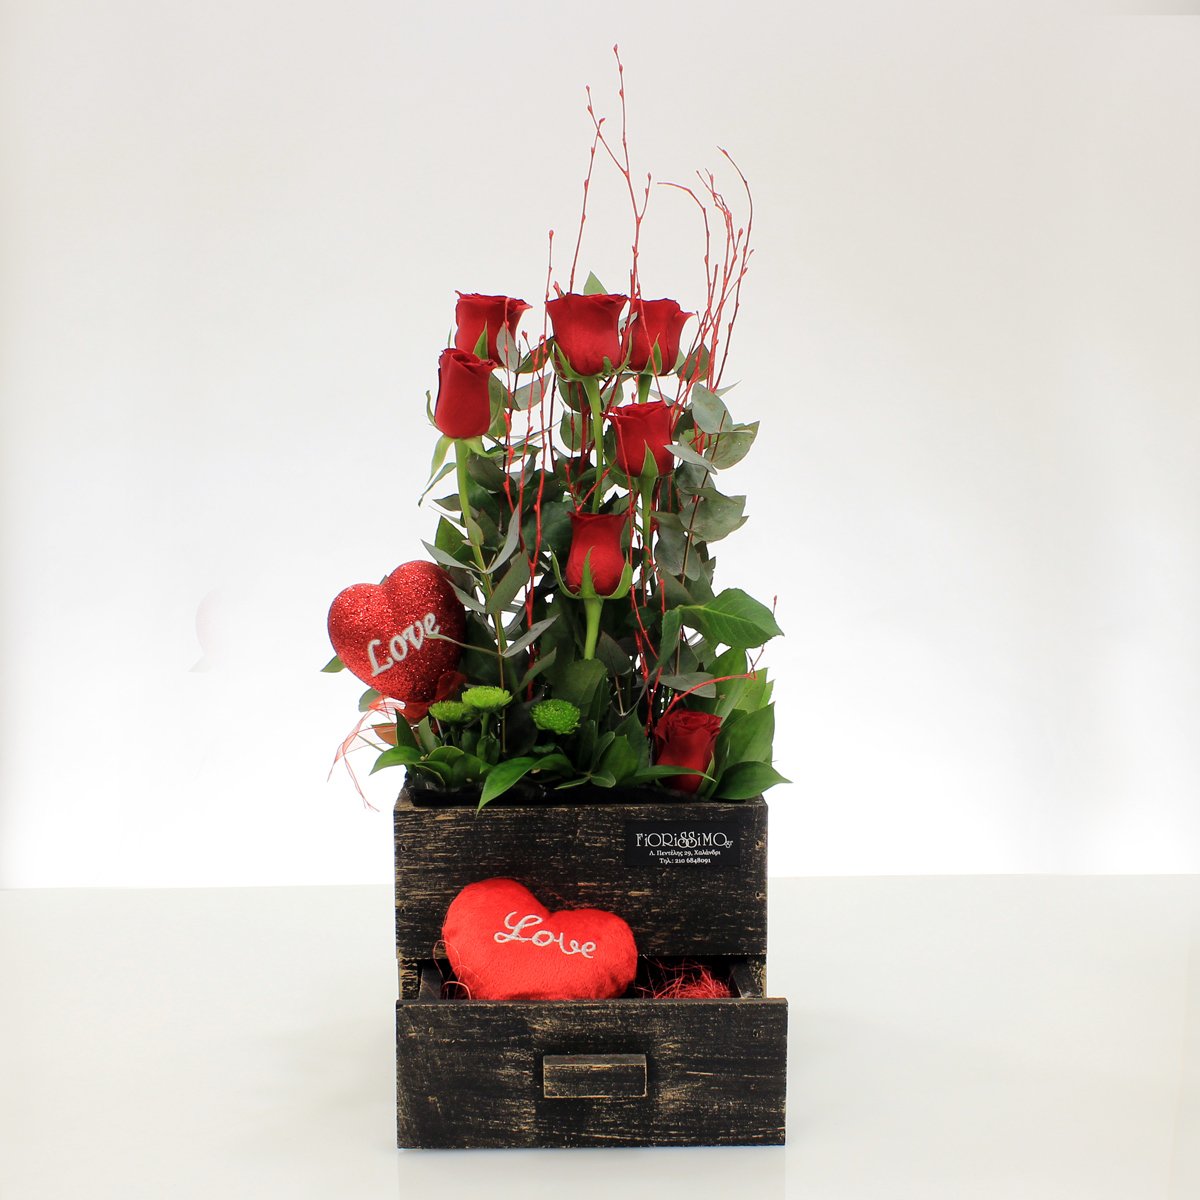 Red roses and wooden base!